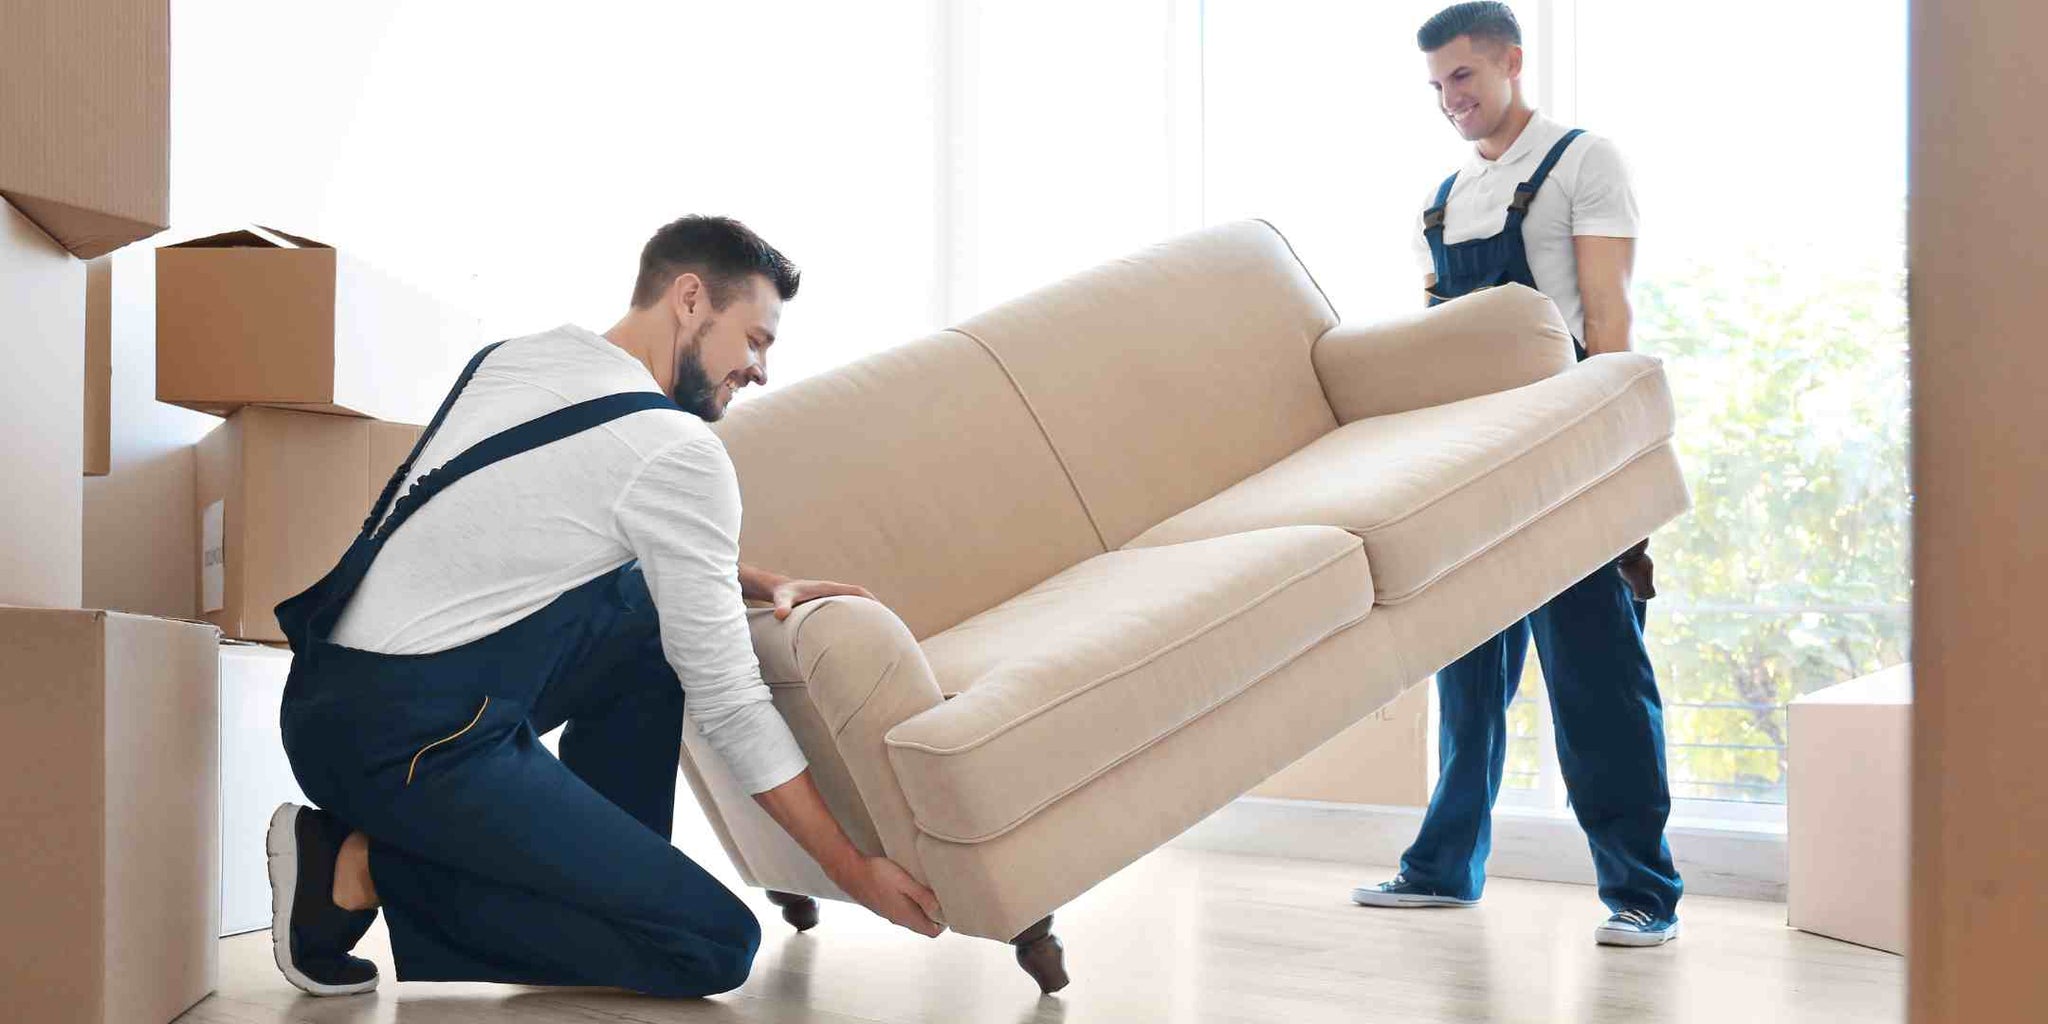 Steps to Take for Damaged Furniture Delivery